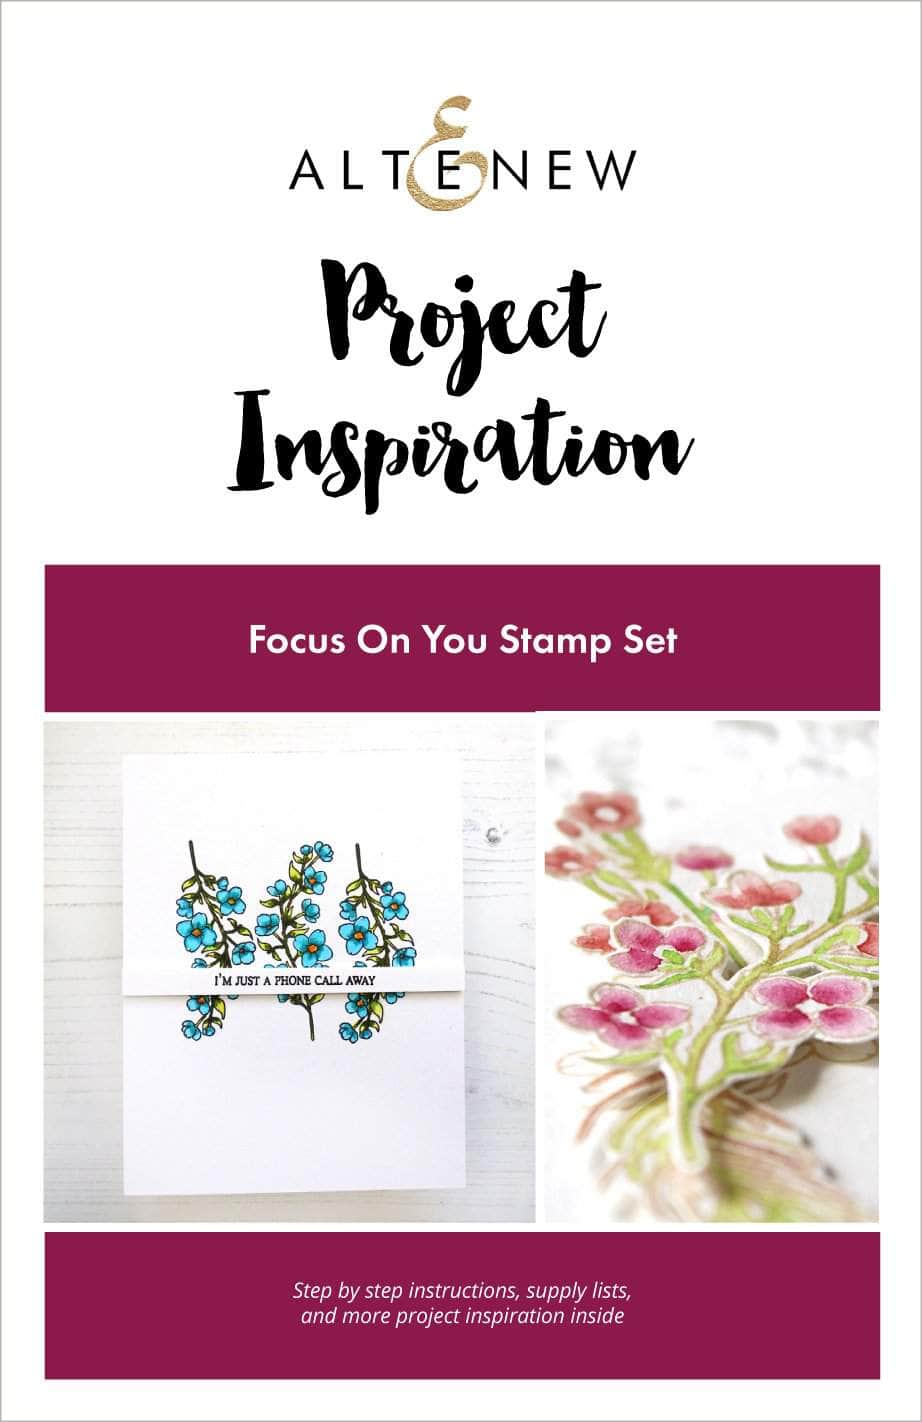 Printed Media Focus On You Project Inspiration Guide